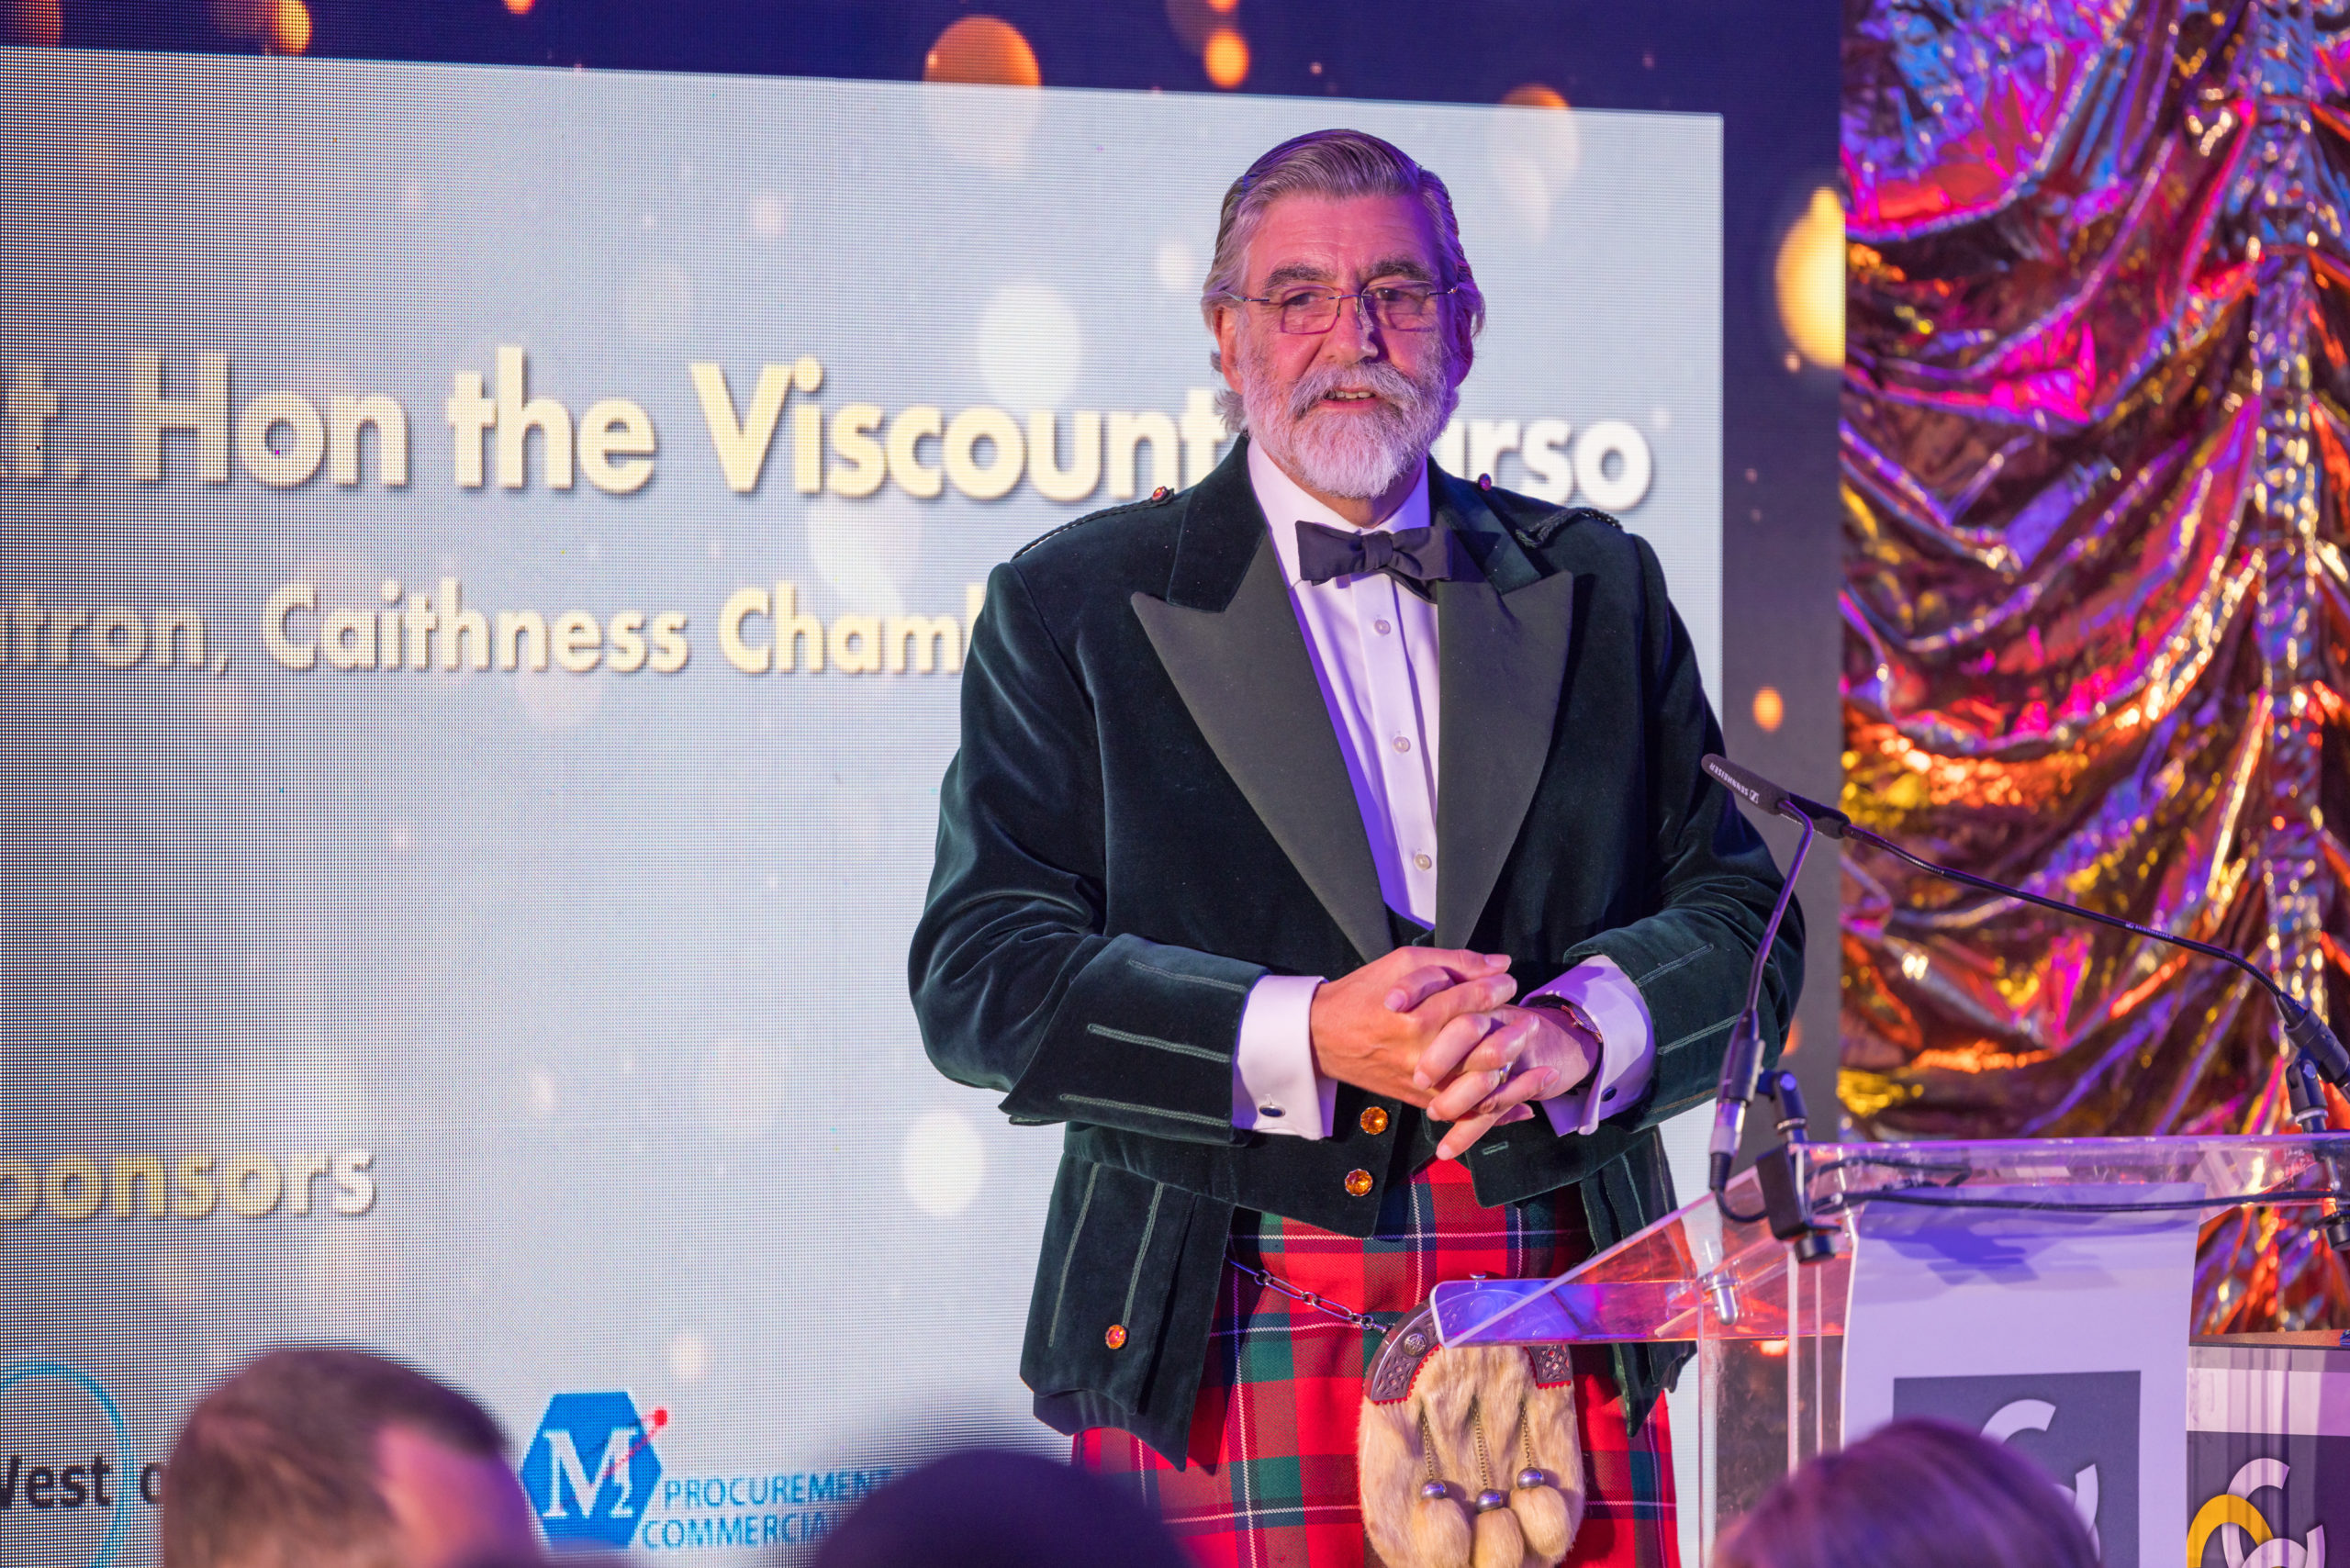 The annual awards were introduced by longstanding patron of the Caithness Chamber, Rt. Hon. The Viscount Thurso, Lord Lieutenant for Caithness.